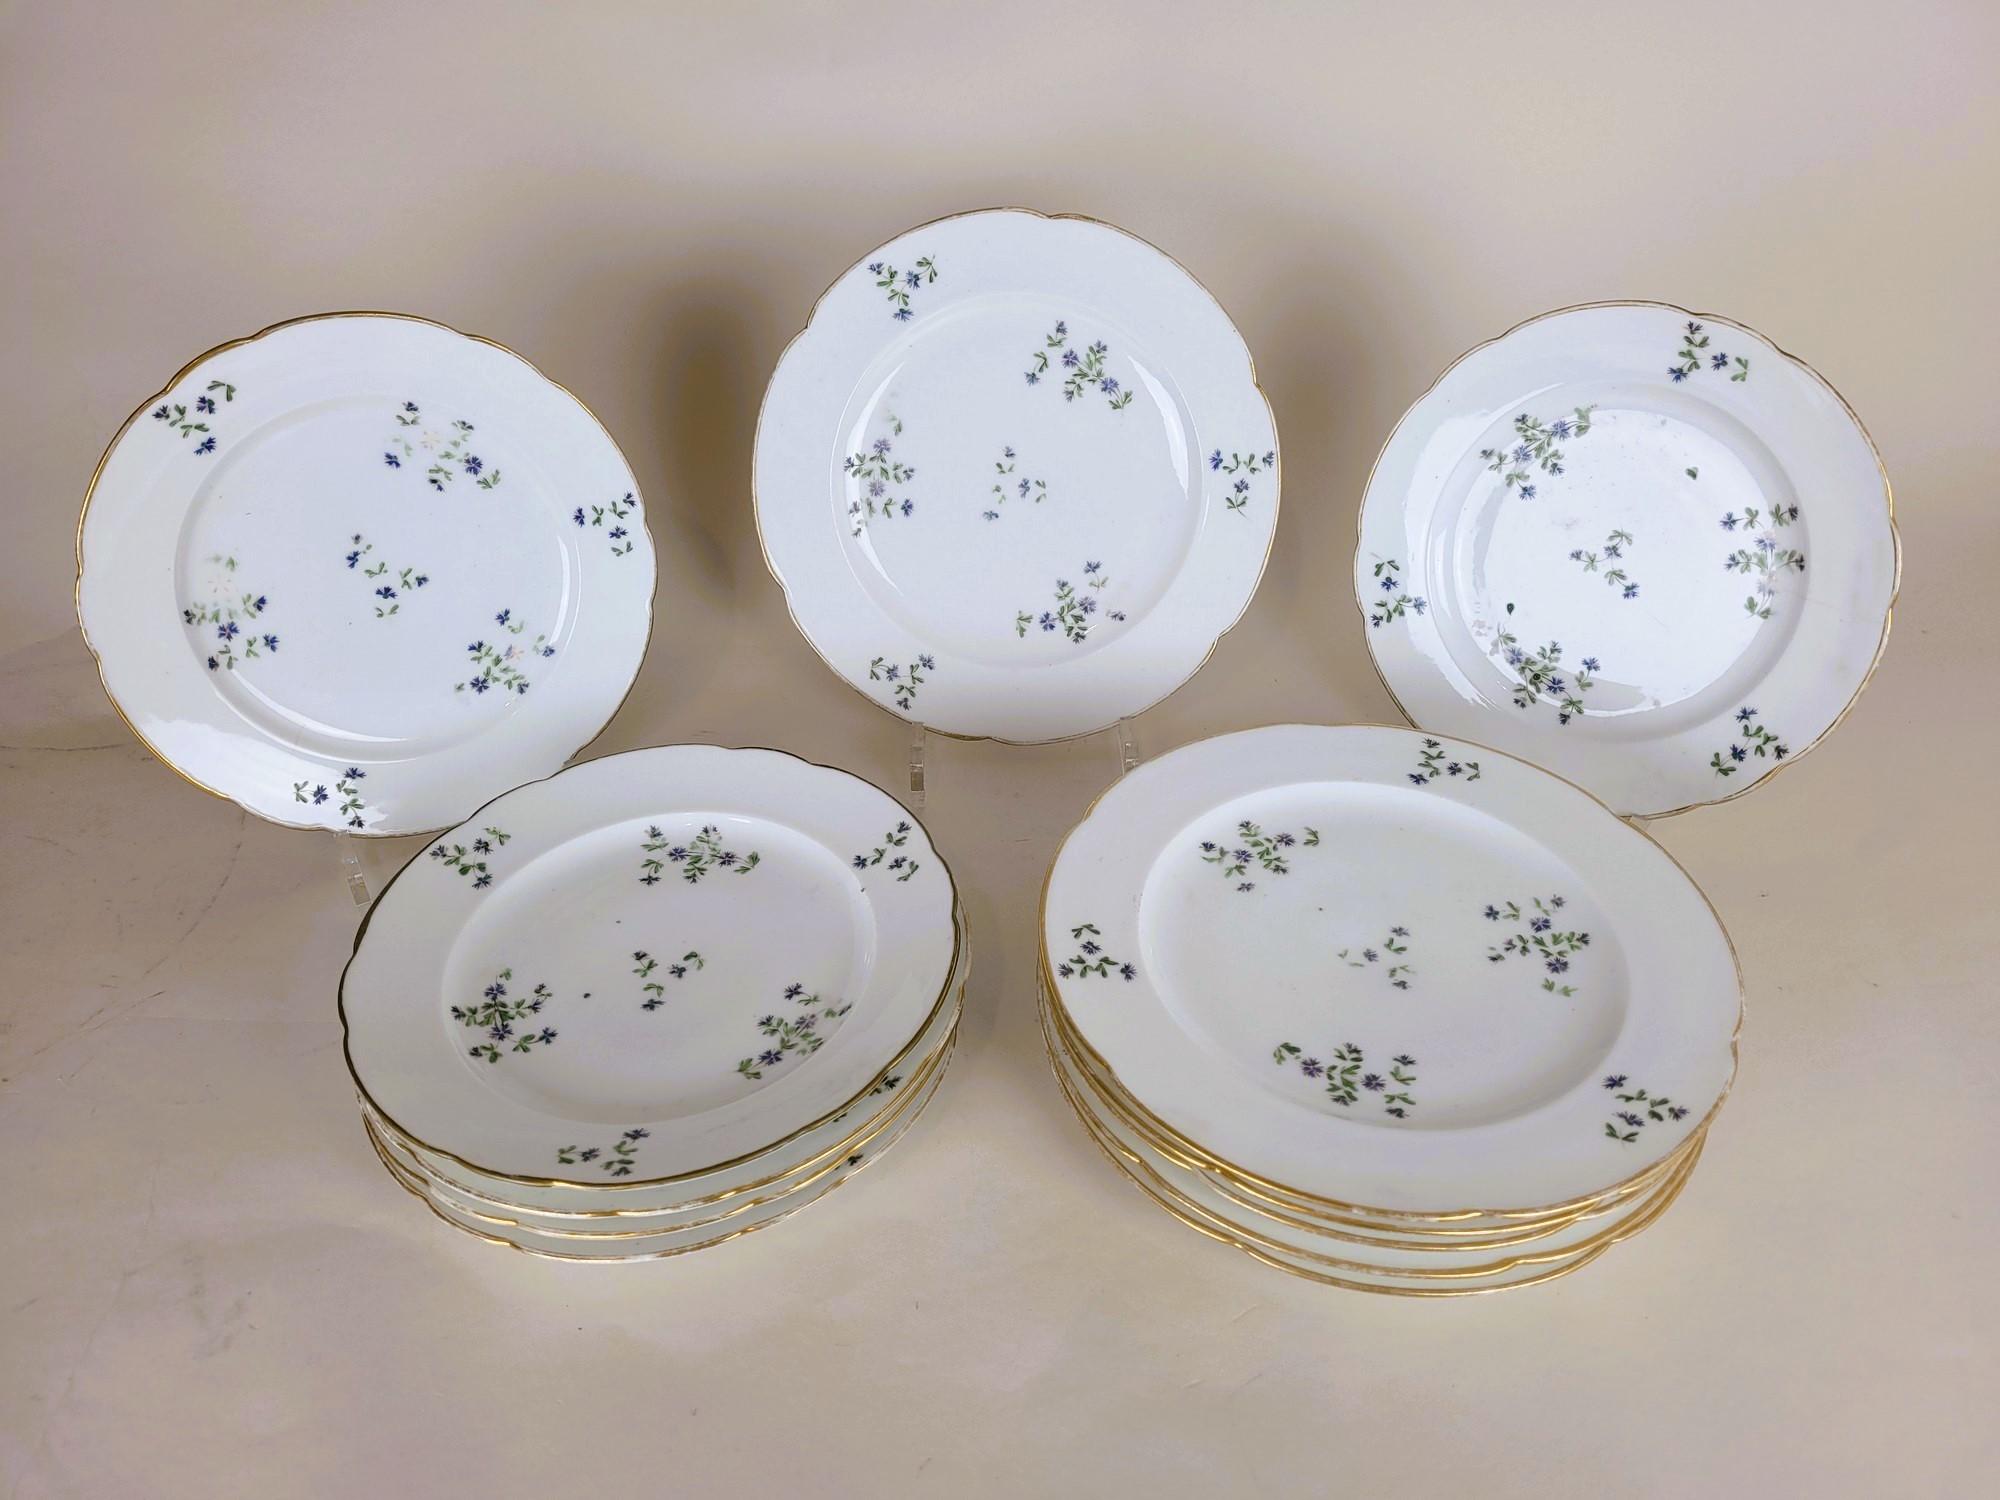 Nast à Paris, series of 12 plates in white porcelain, with scalloped edges, barbel model, with gold highlights

Slight wear of time, 4 plates with a 